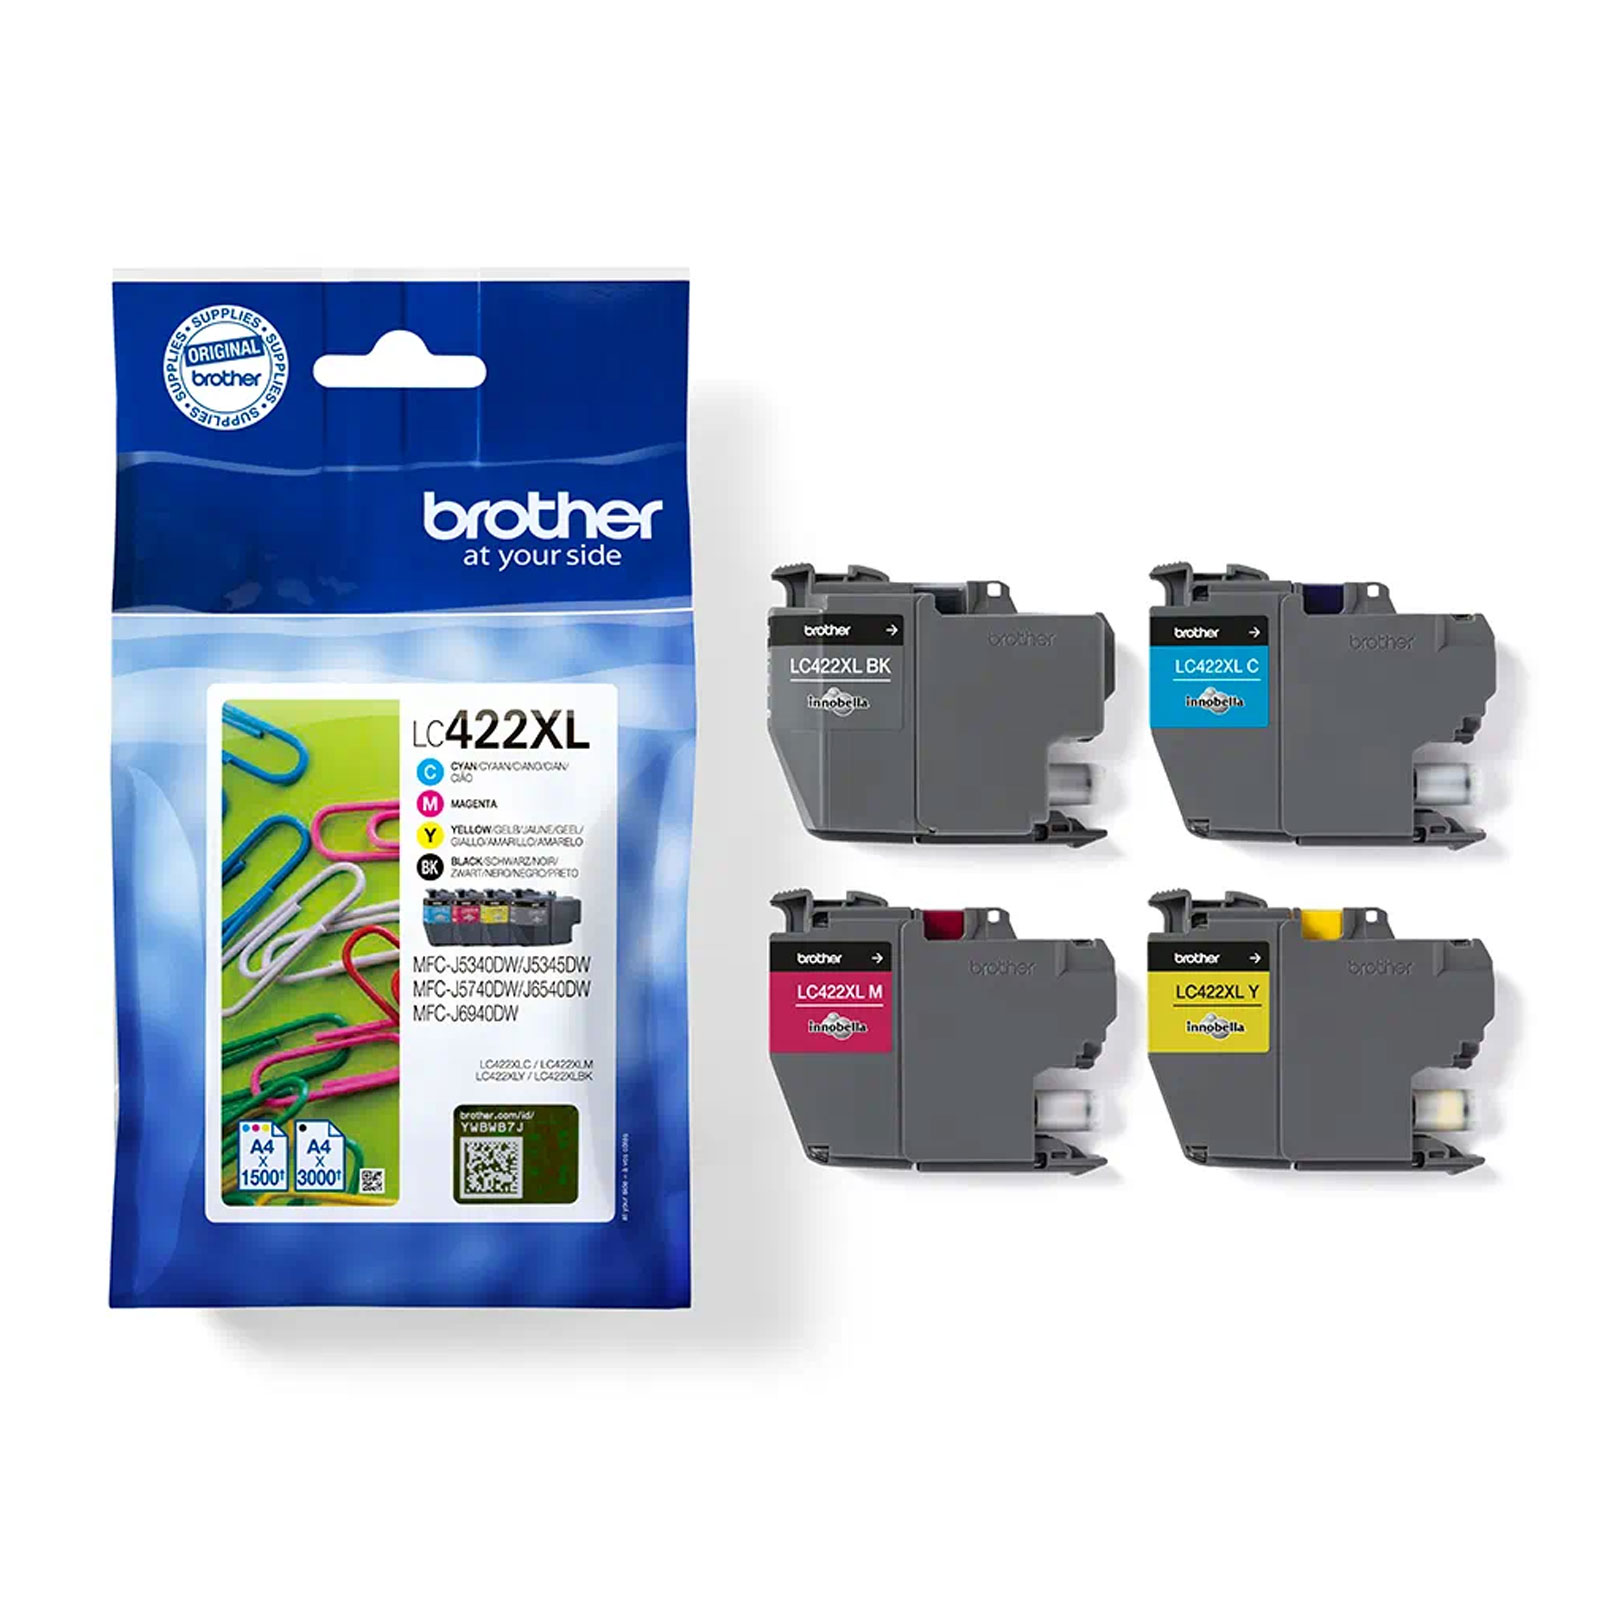 Brother LC422 XLVAL Druckerpatrone Multipack